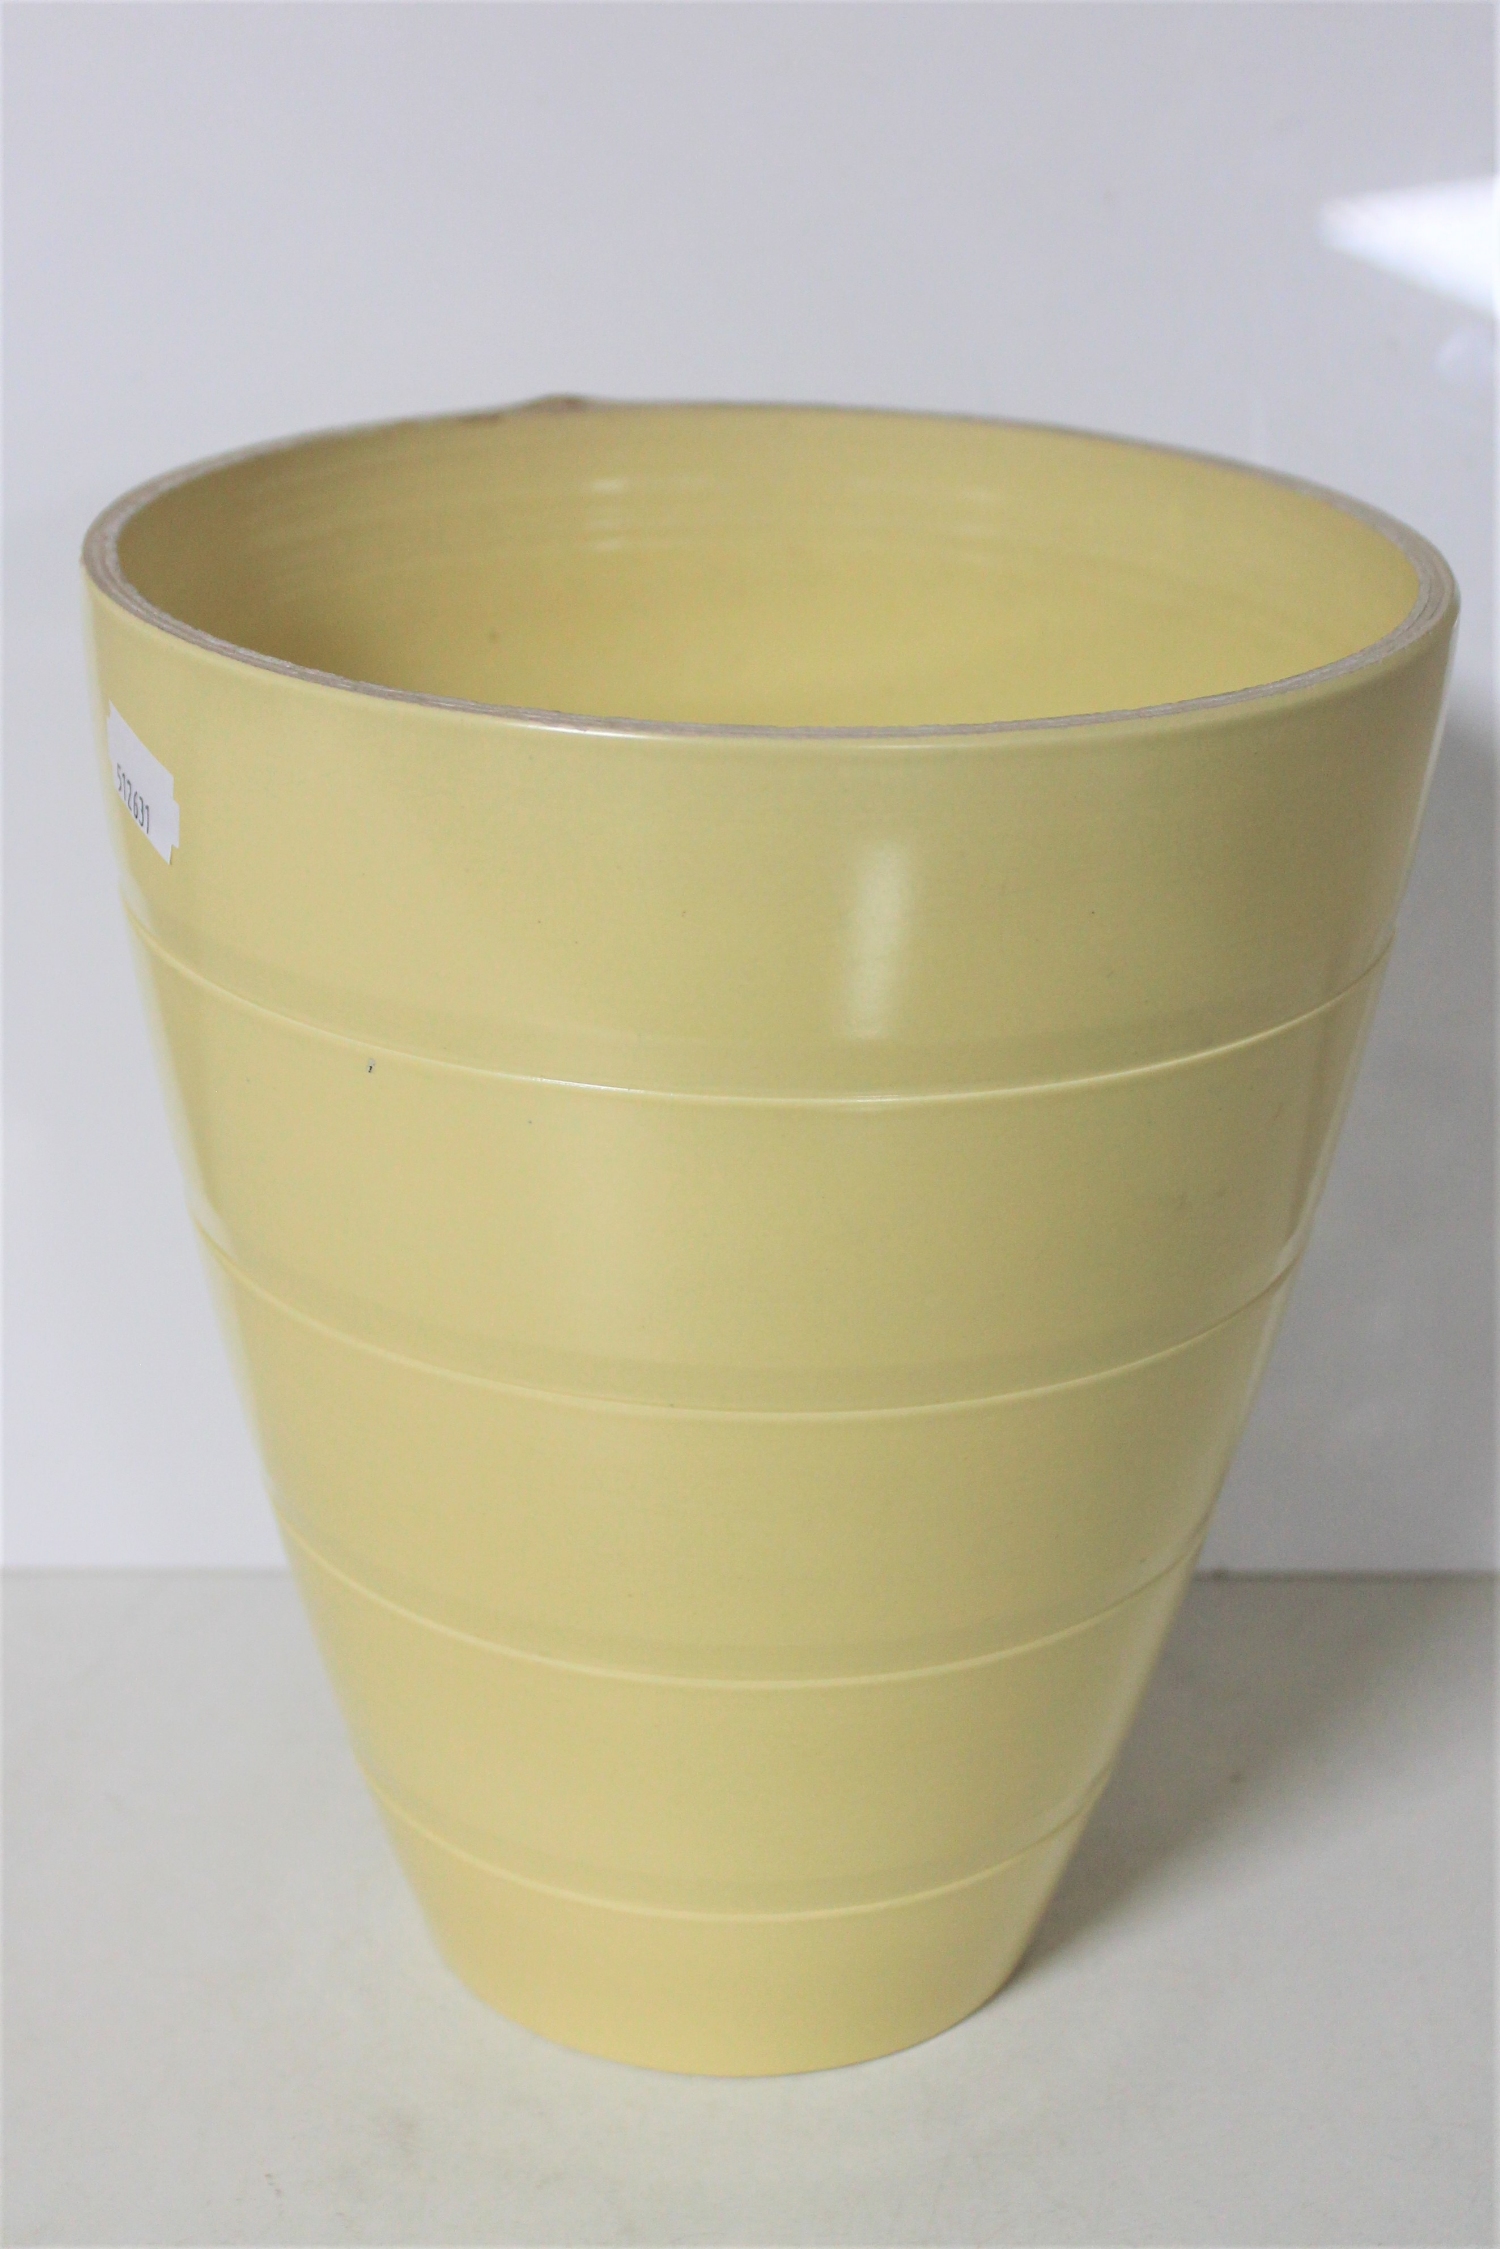 A Wedgwood Keith Murray design conical vase, matt straw, height 13.